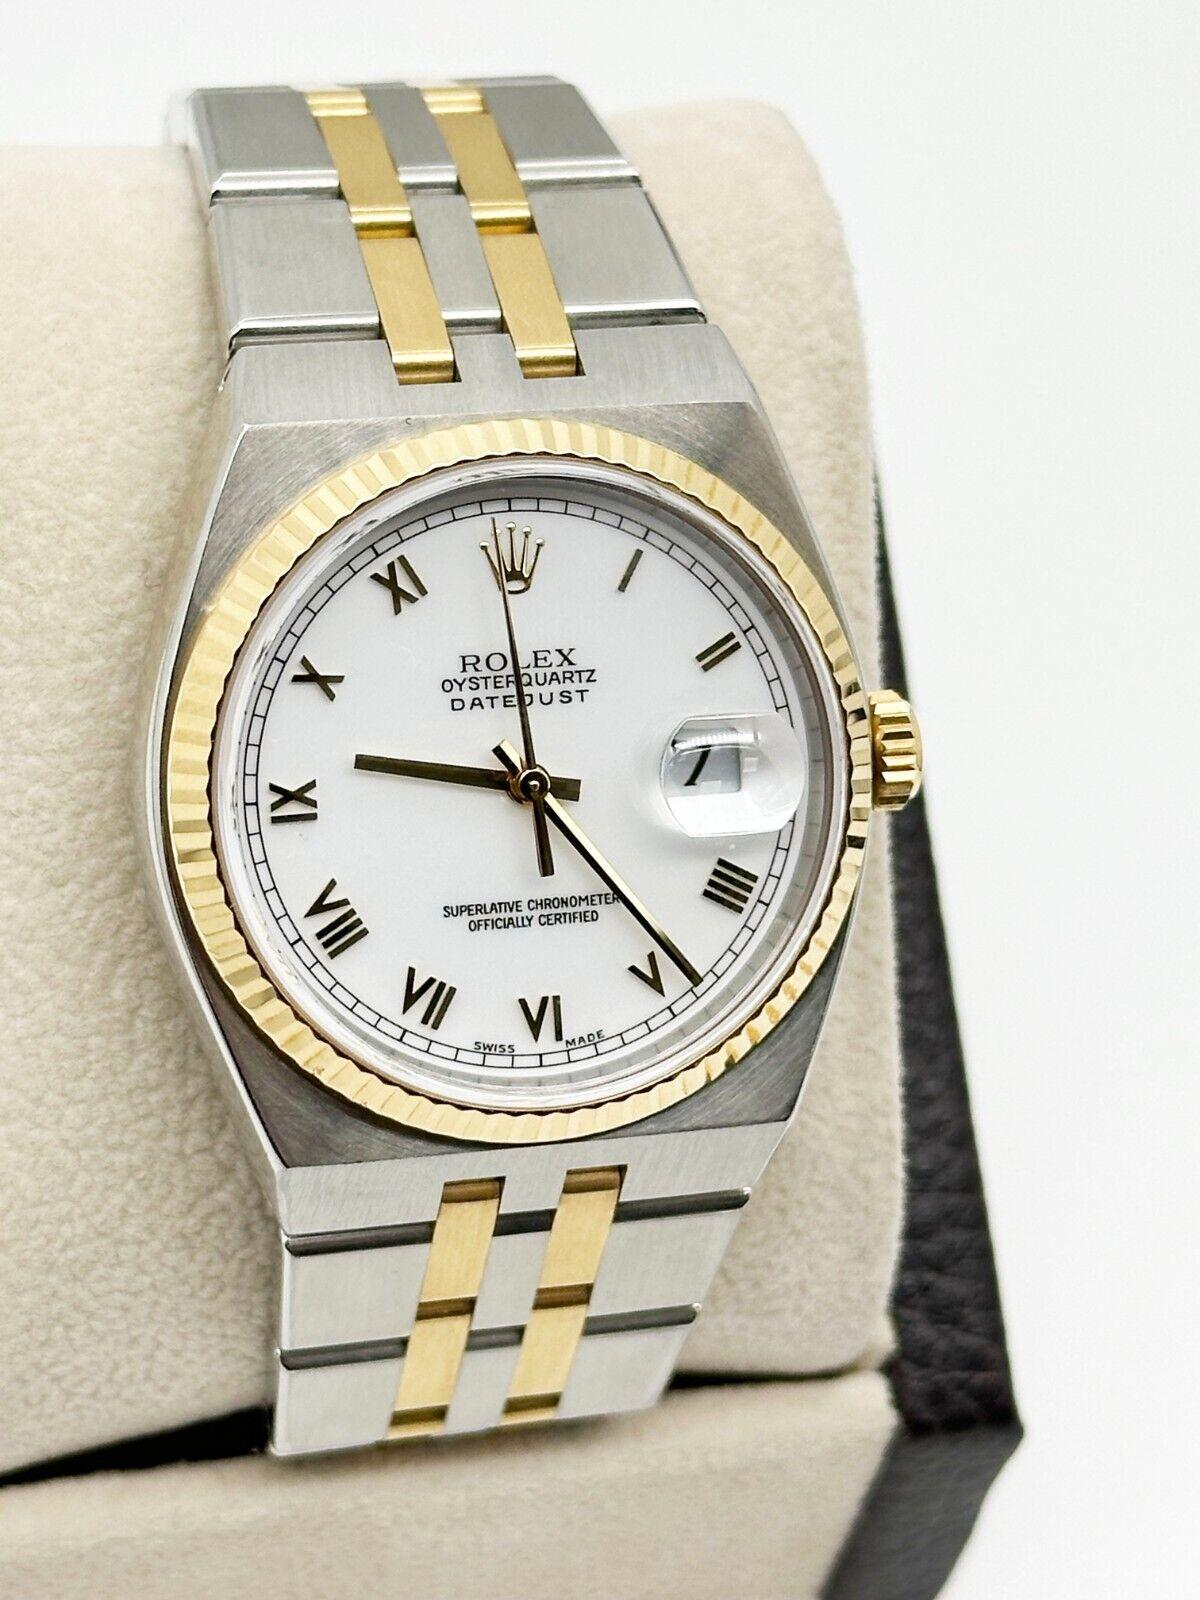 Rolex 17013 Datejust Oysterquartz White Dial 18K Yellow Gold Stainless Steel For Sale 3